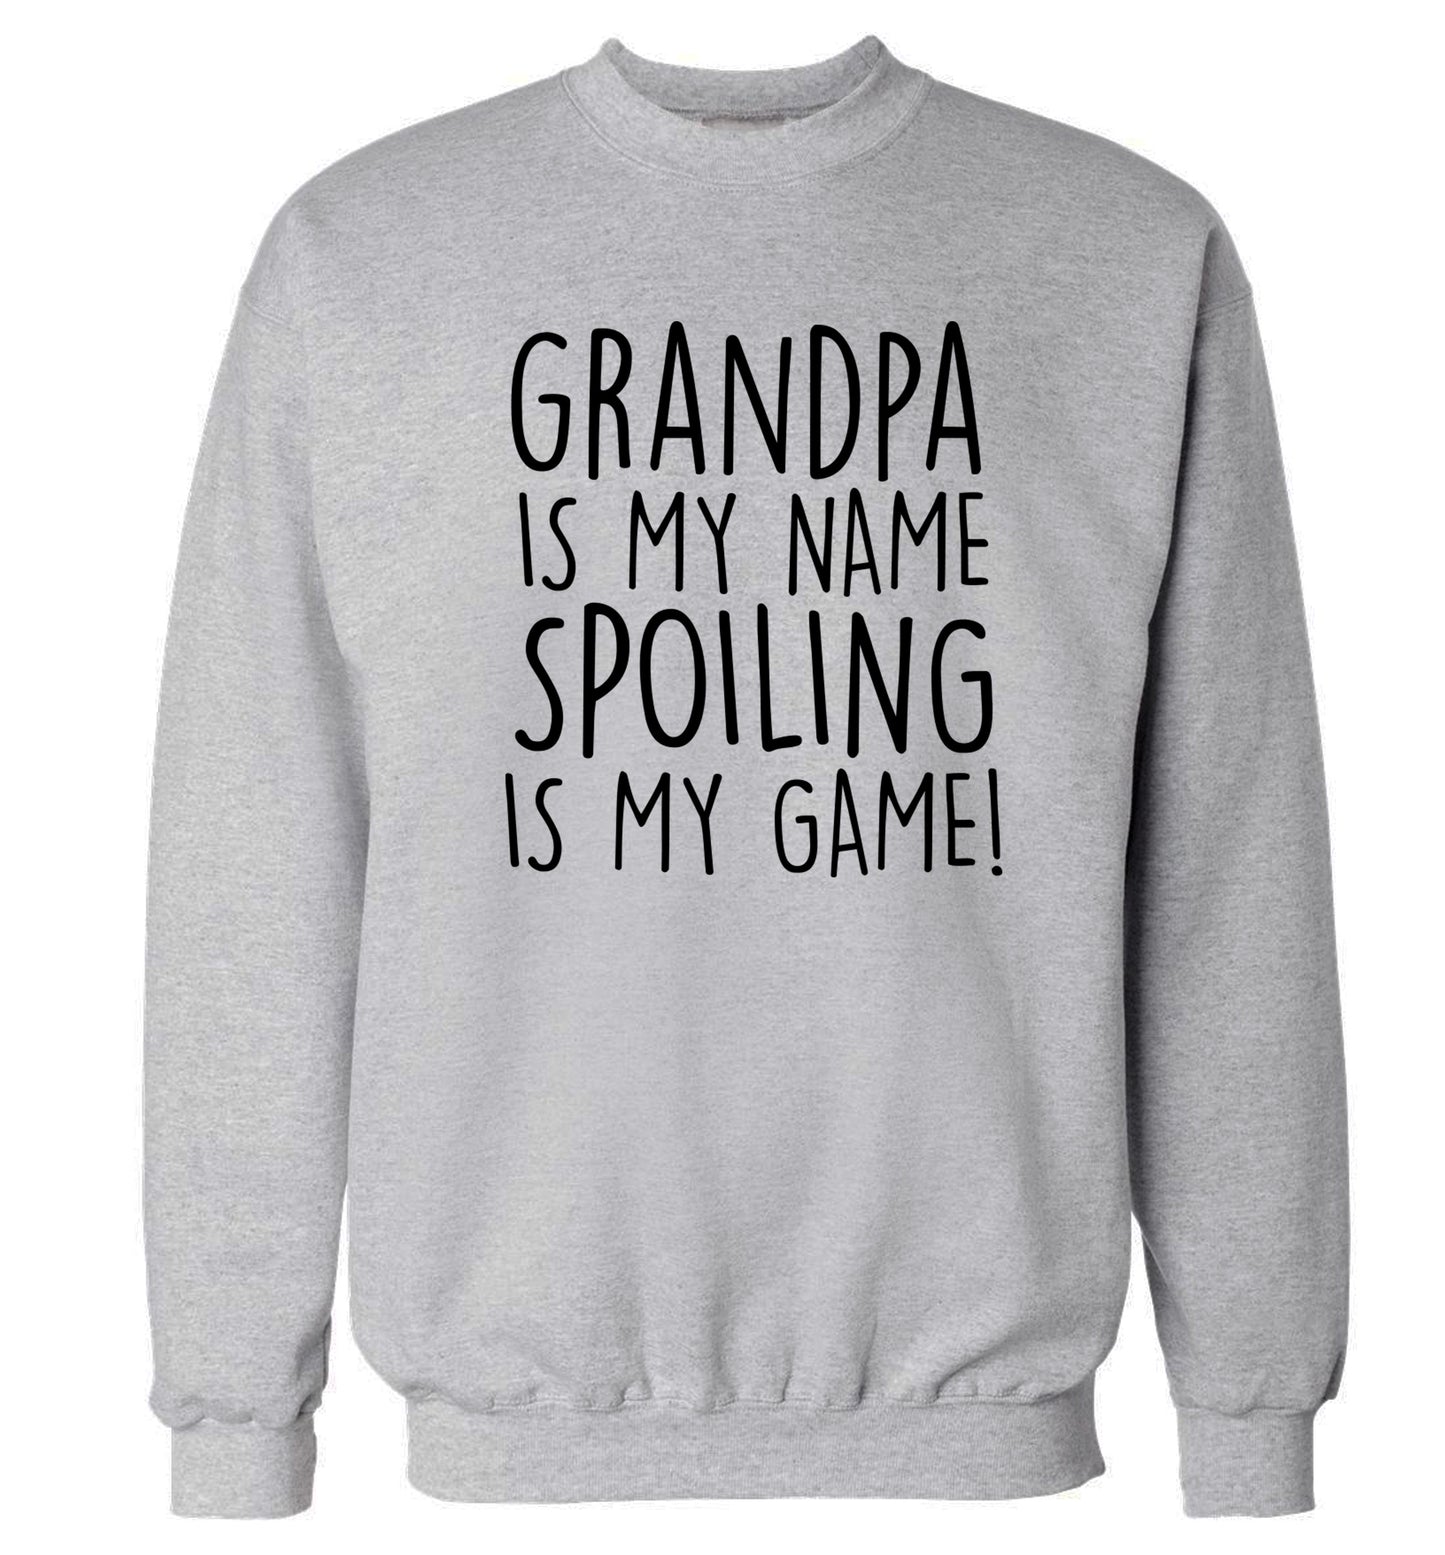 Grandpa is my name, spoiling is my game Adult's unisex grey Sweater 2XL